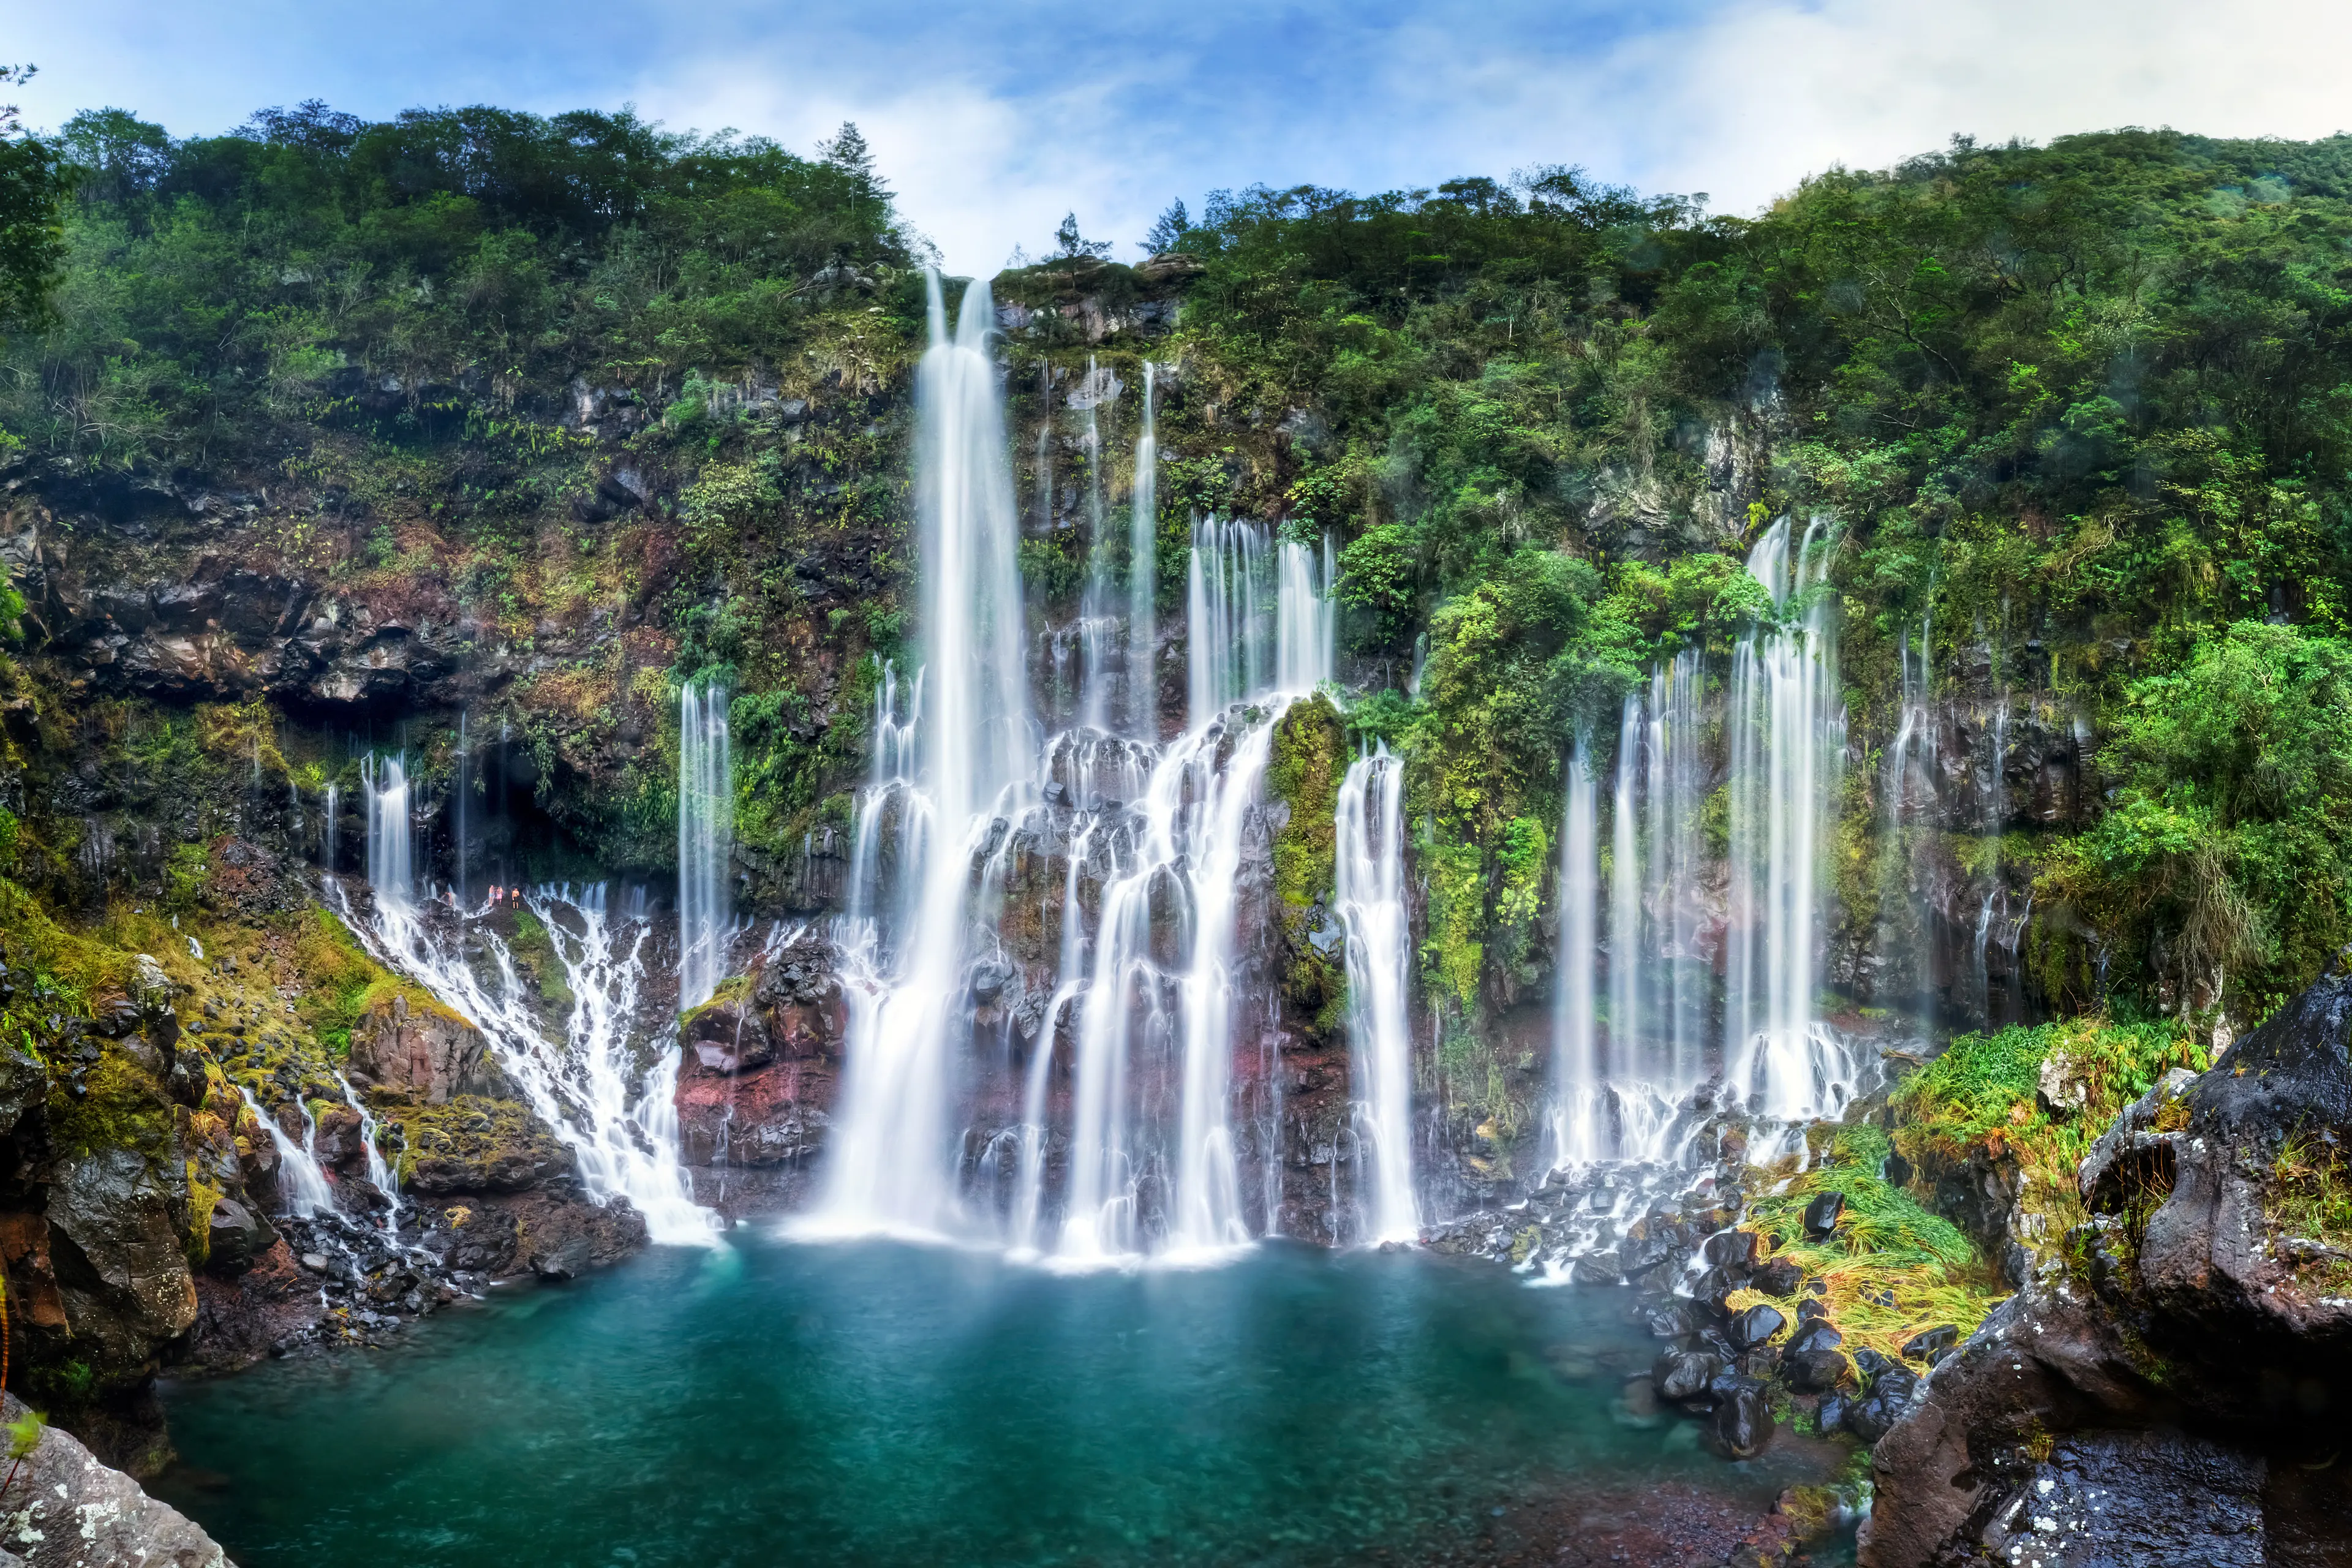 4-Day Adventure & Sightseeing Itinerary in Reunion Island with Friends